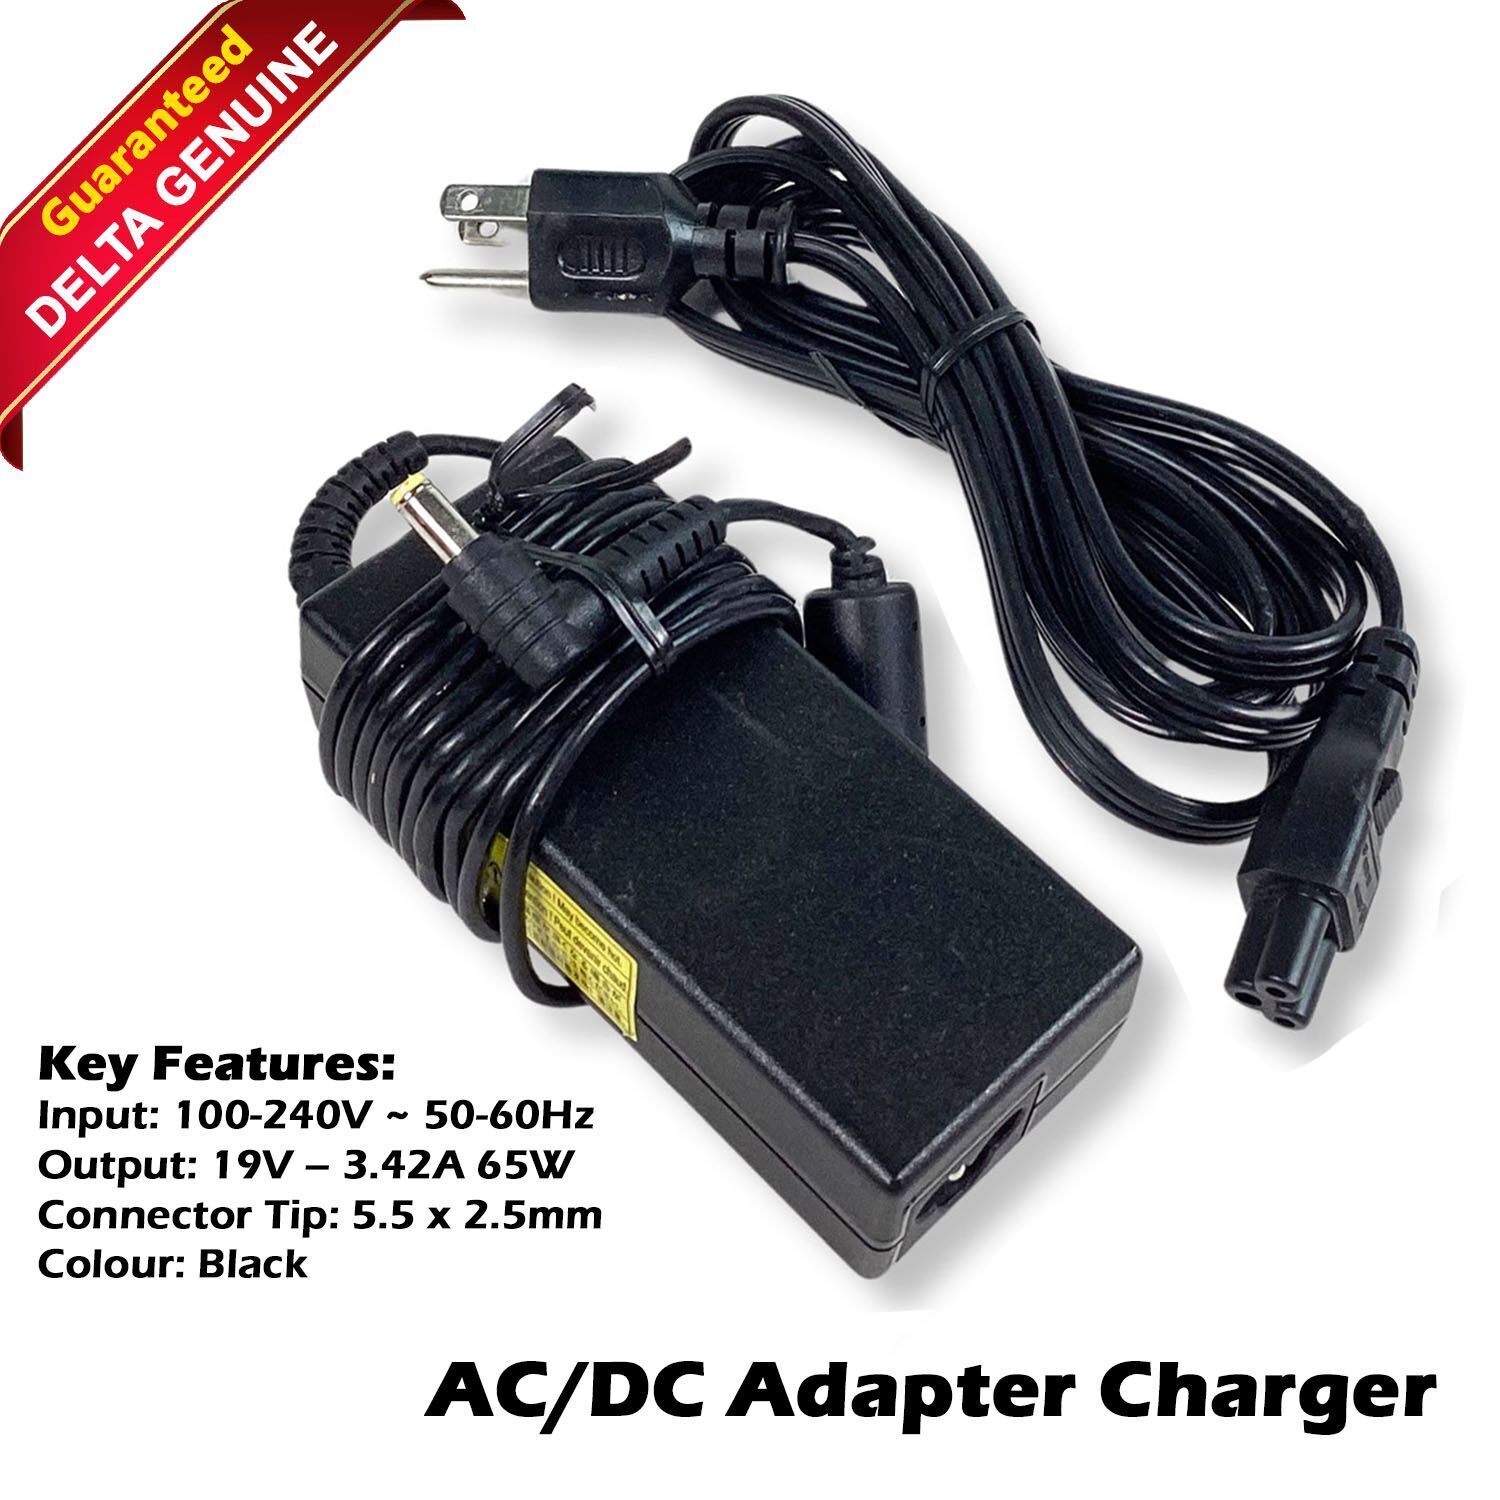 Delta Electronics AC/DC Adapter 3.42A 65W Laptop Charger W/ Power Cord ADP-65JH